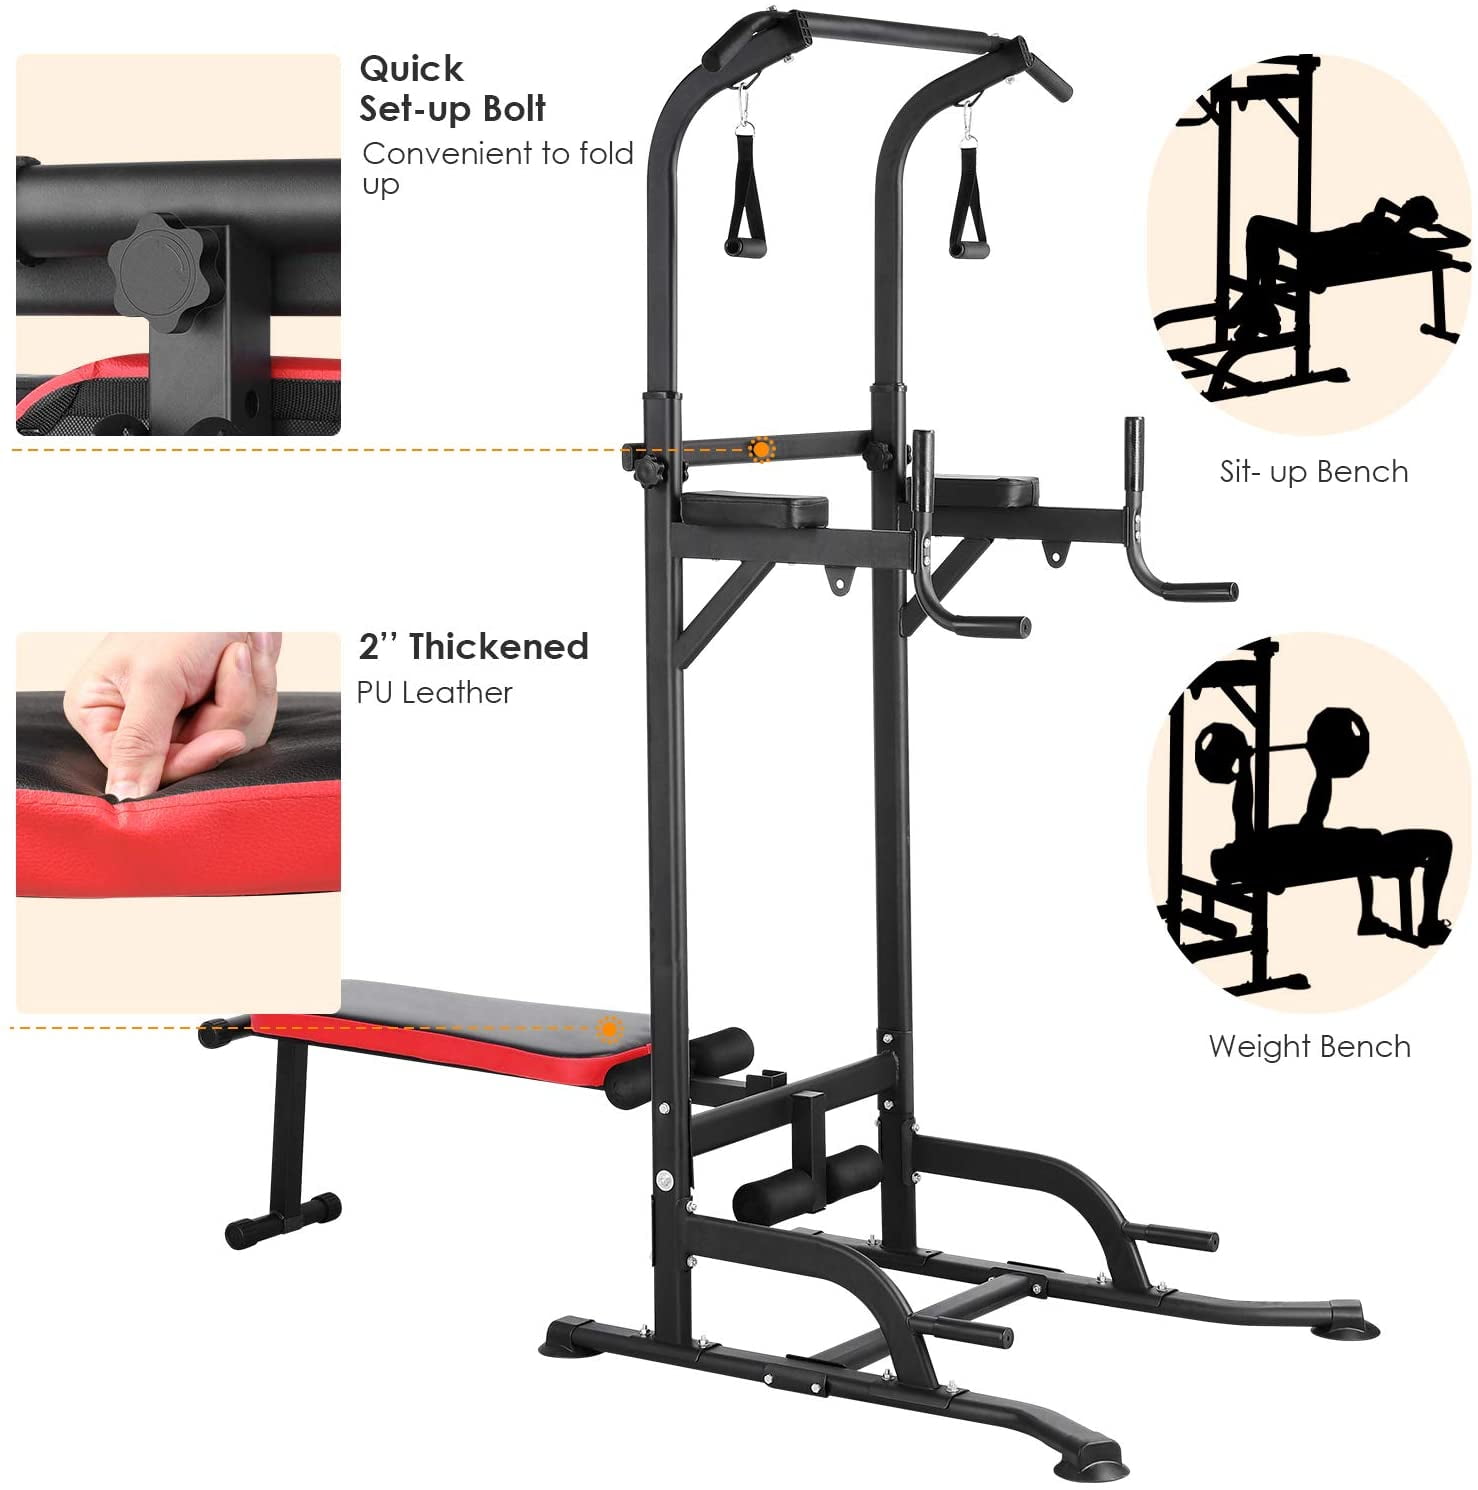 Exersci Heavy Duty Squat Rack with Dips and Storage Arms Version 2 